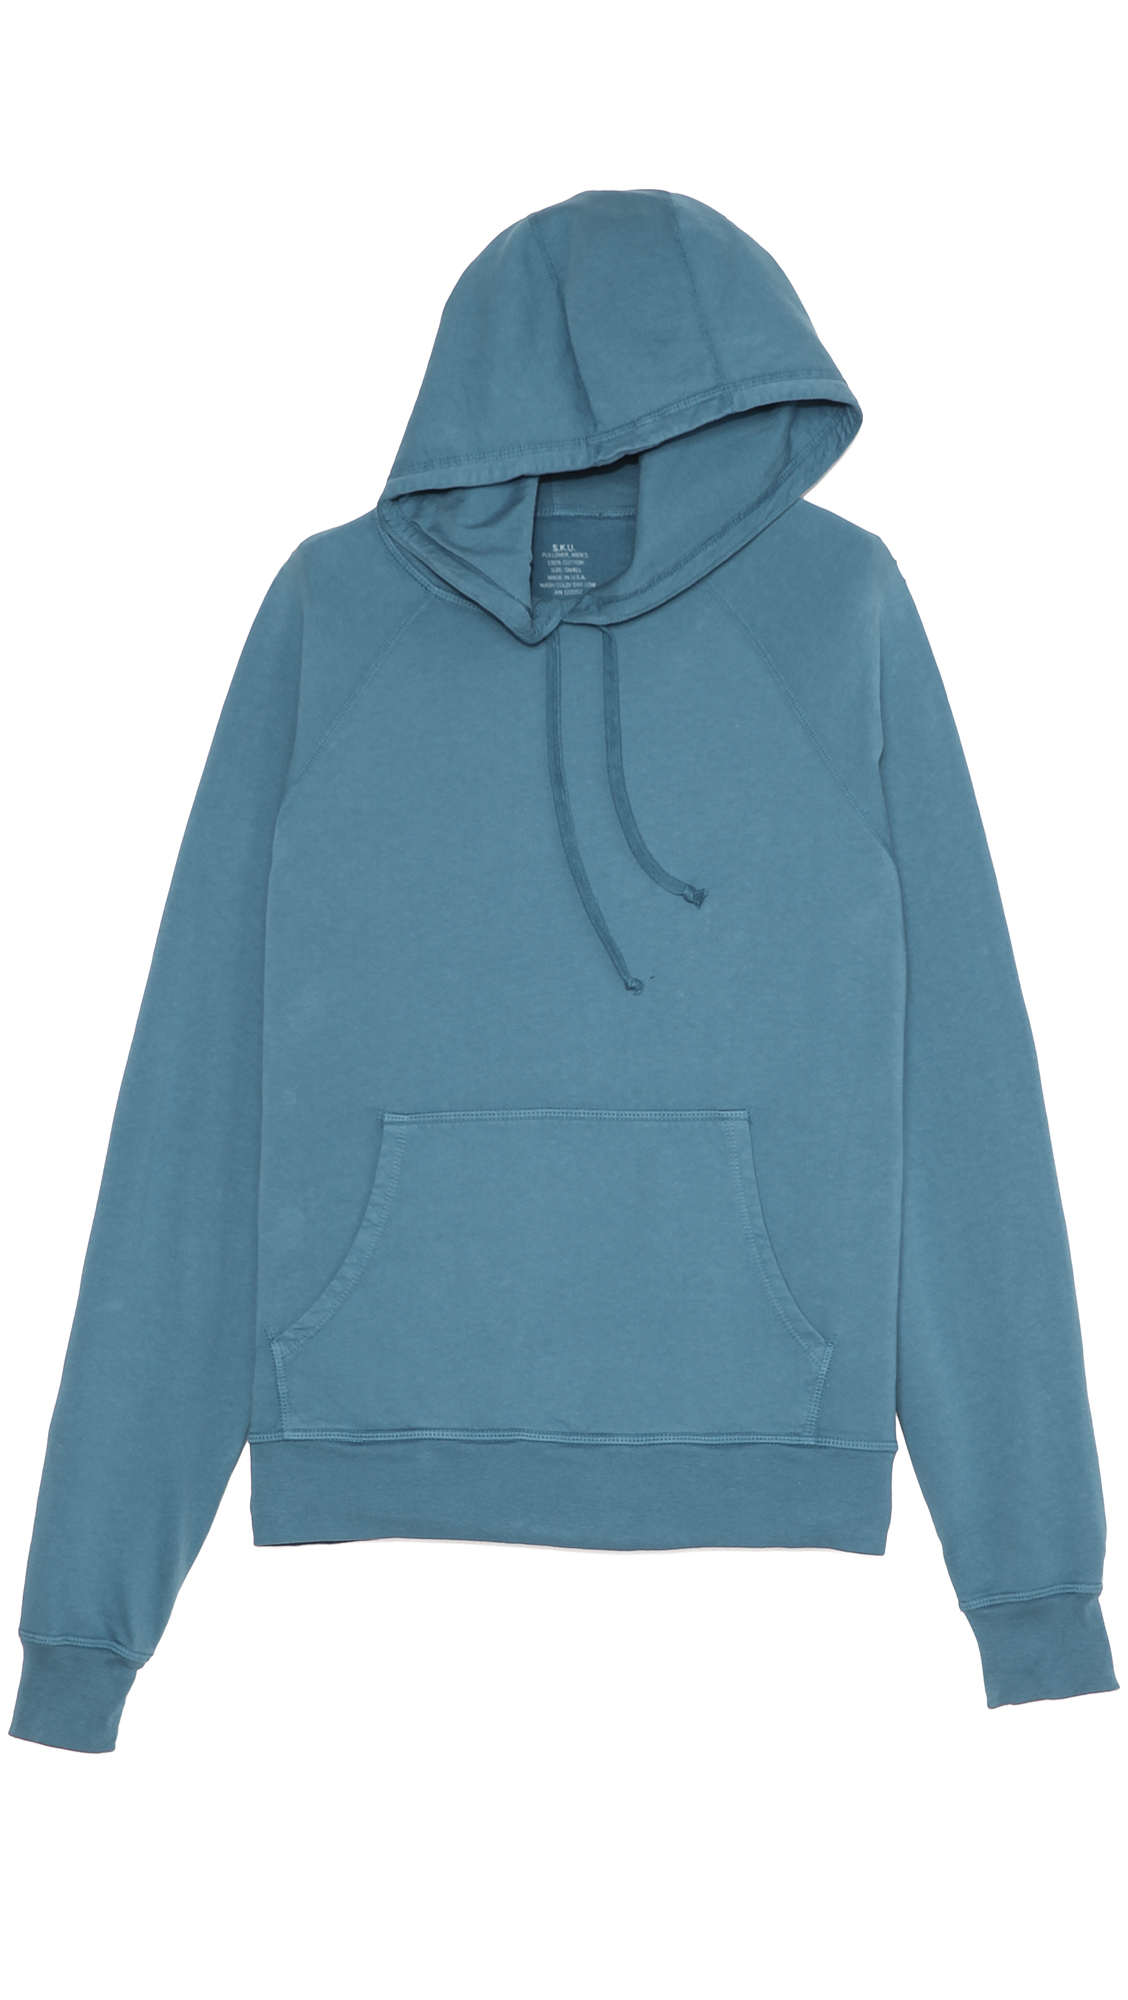 Save Khaki Pullover Hoodie in Blue for Men - Lyst